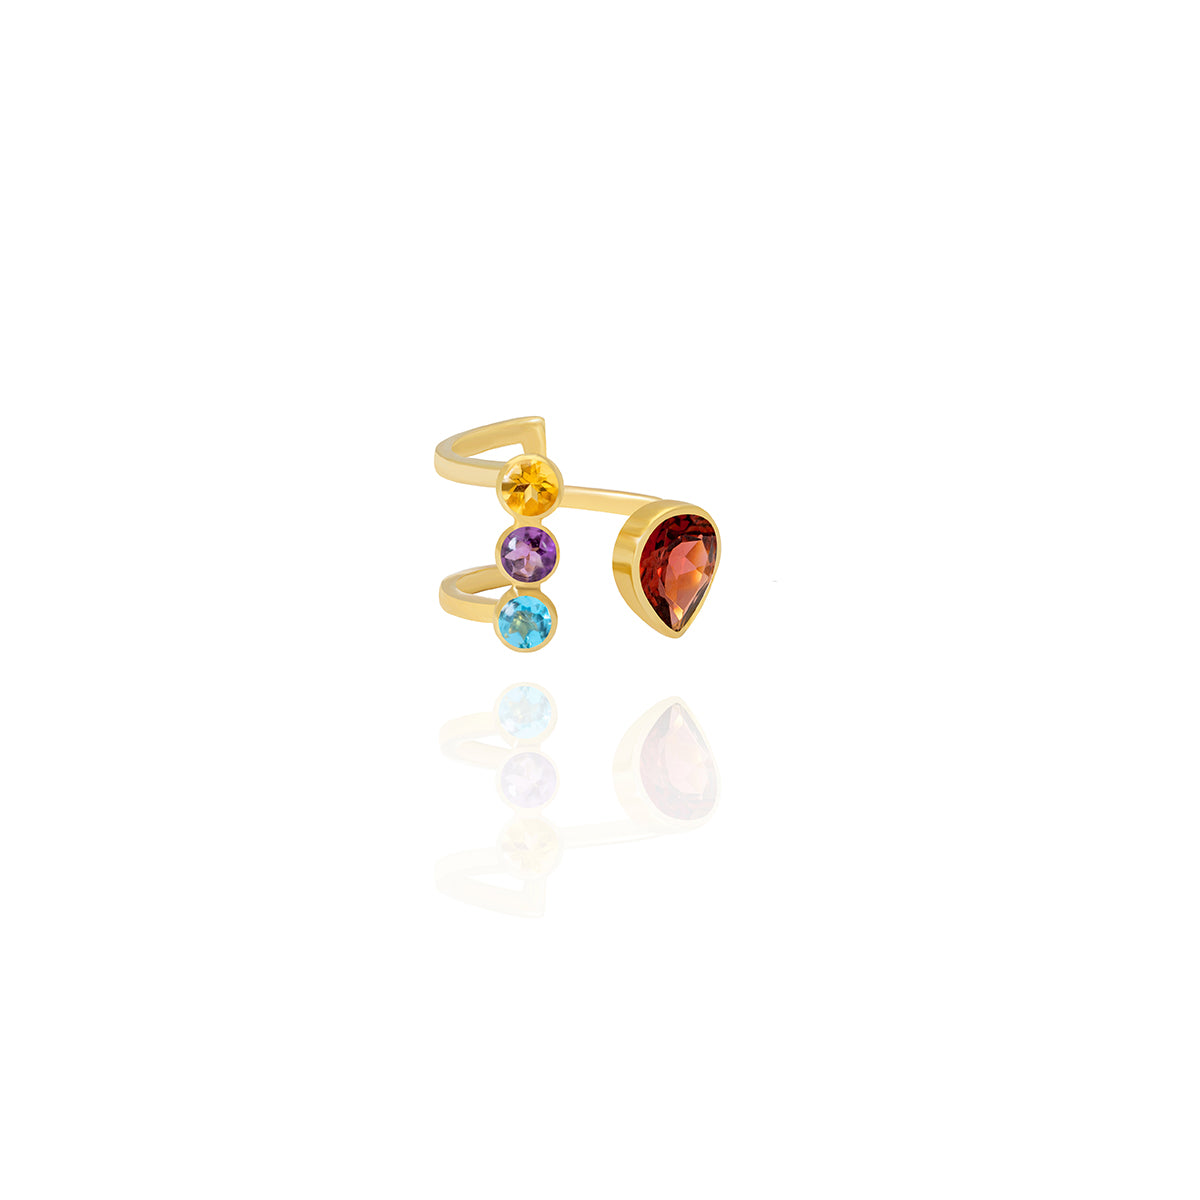 Open Ring Adorned with a Stunning Pear-Shaped Stone and Three Exquisite Round Semi-Precious Stones